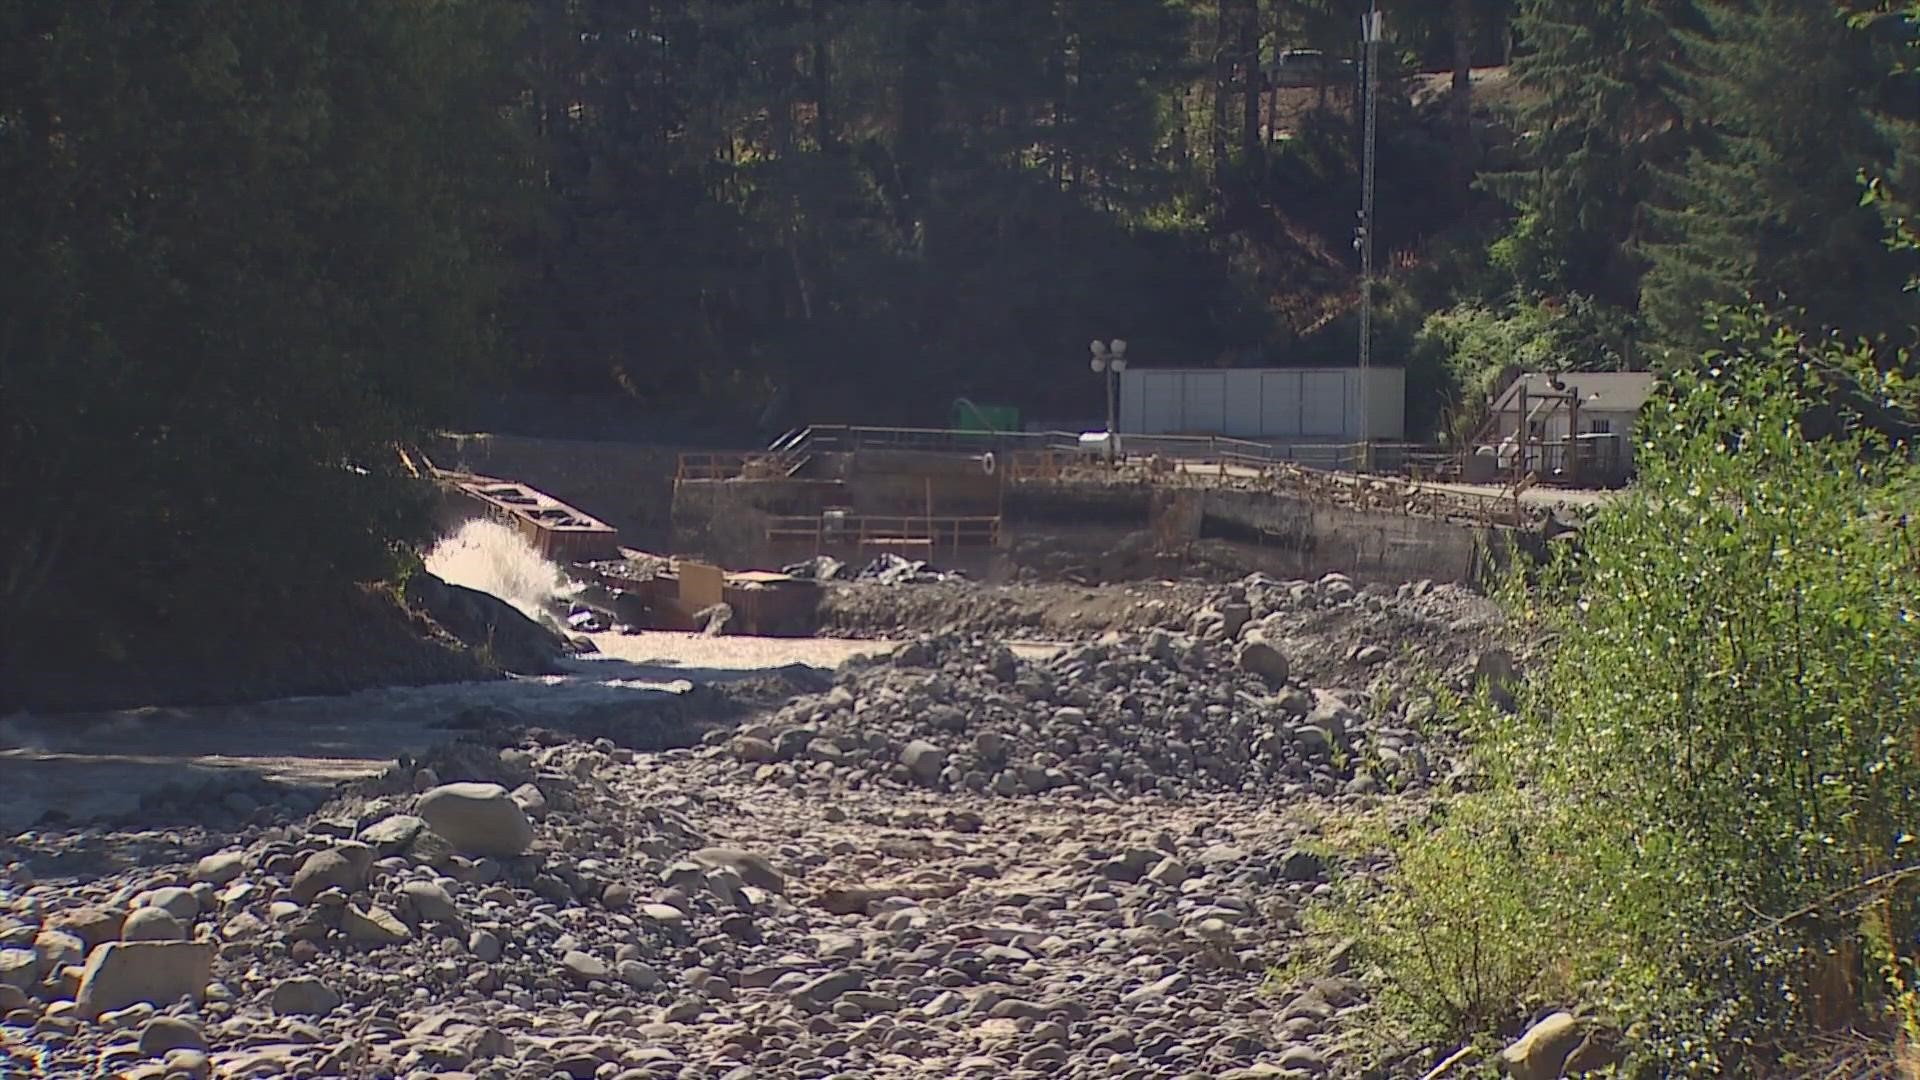 Washington Attorney General Bob Ferguson's office is recommending a sentence of $1 million, including $745,000 in restitution to protect the Puyallup River's health.